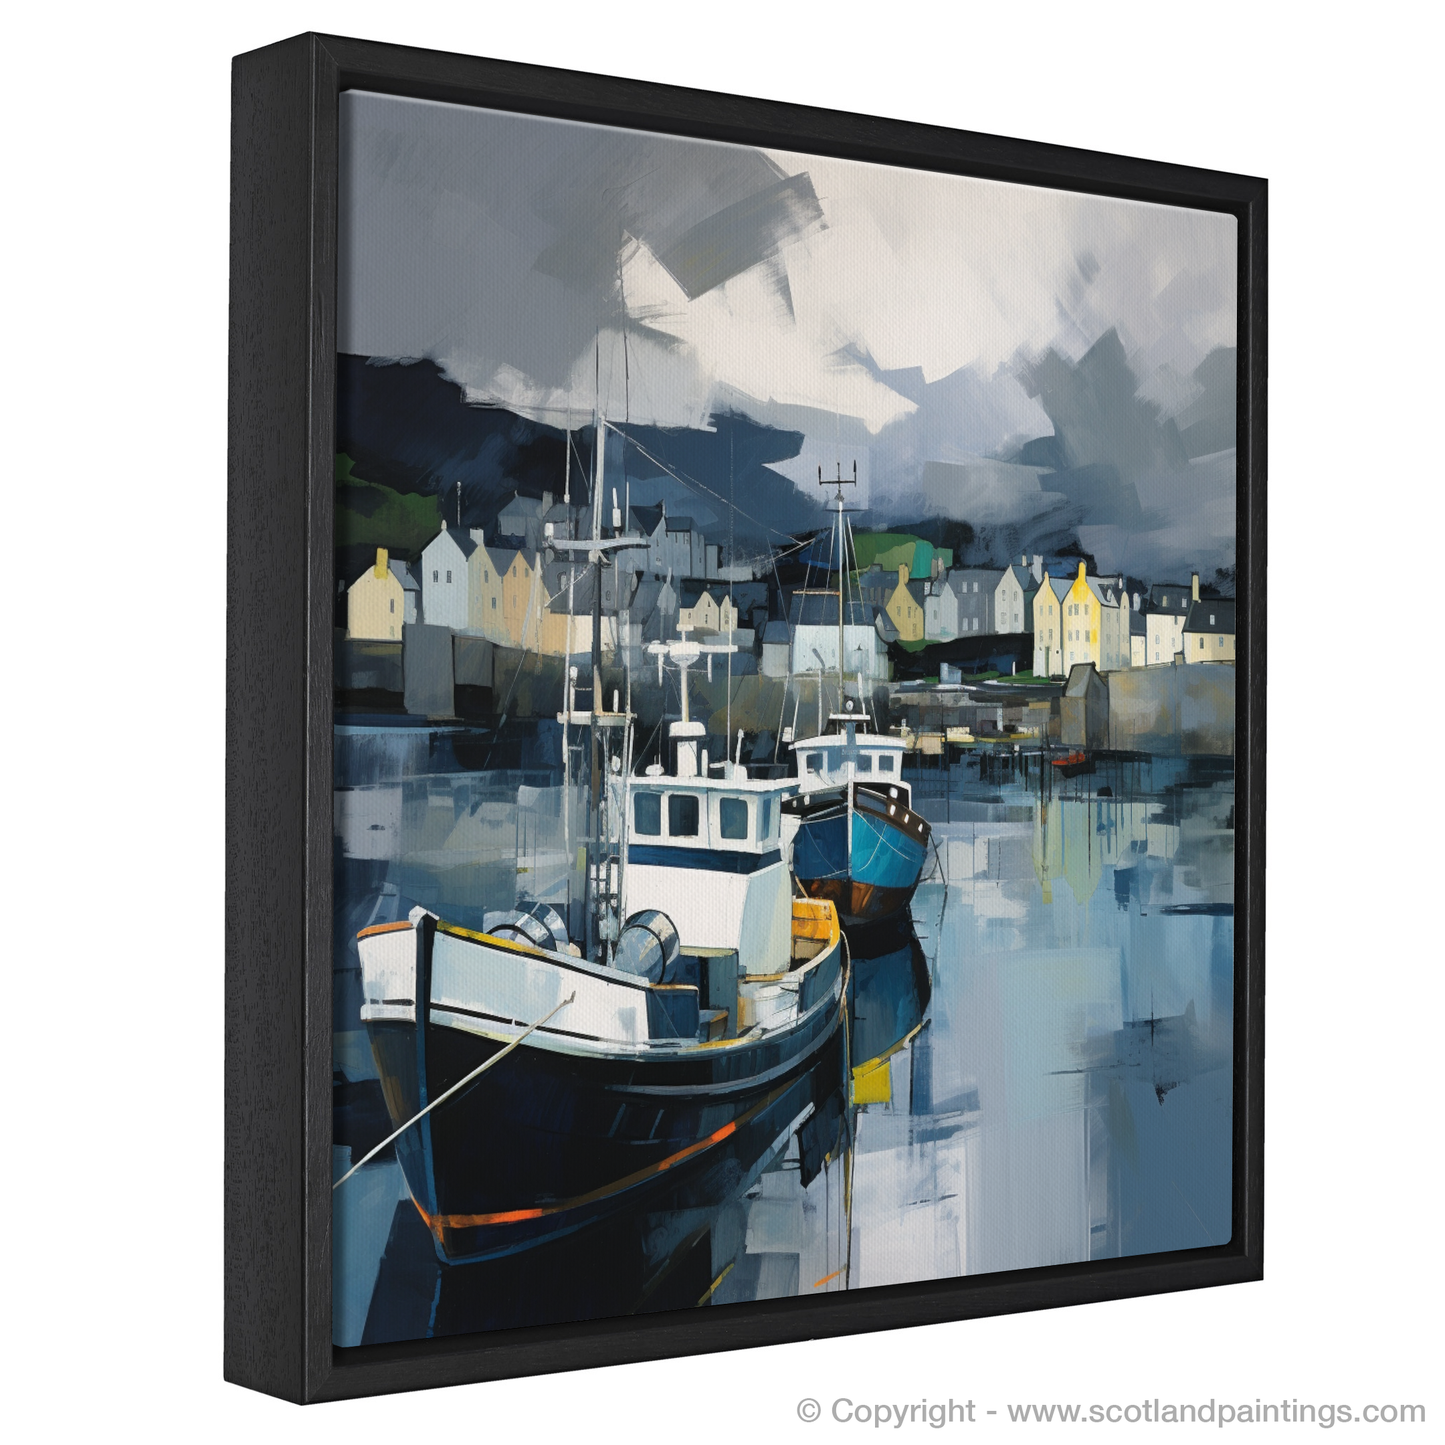 Storm over Oban Harbour: A Minimalist Homage to Scottish Seascapes